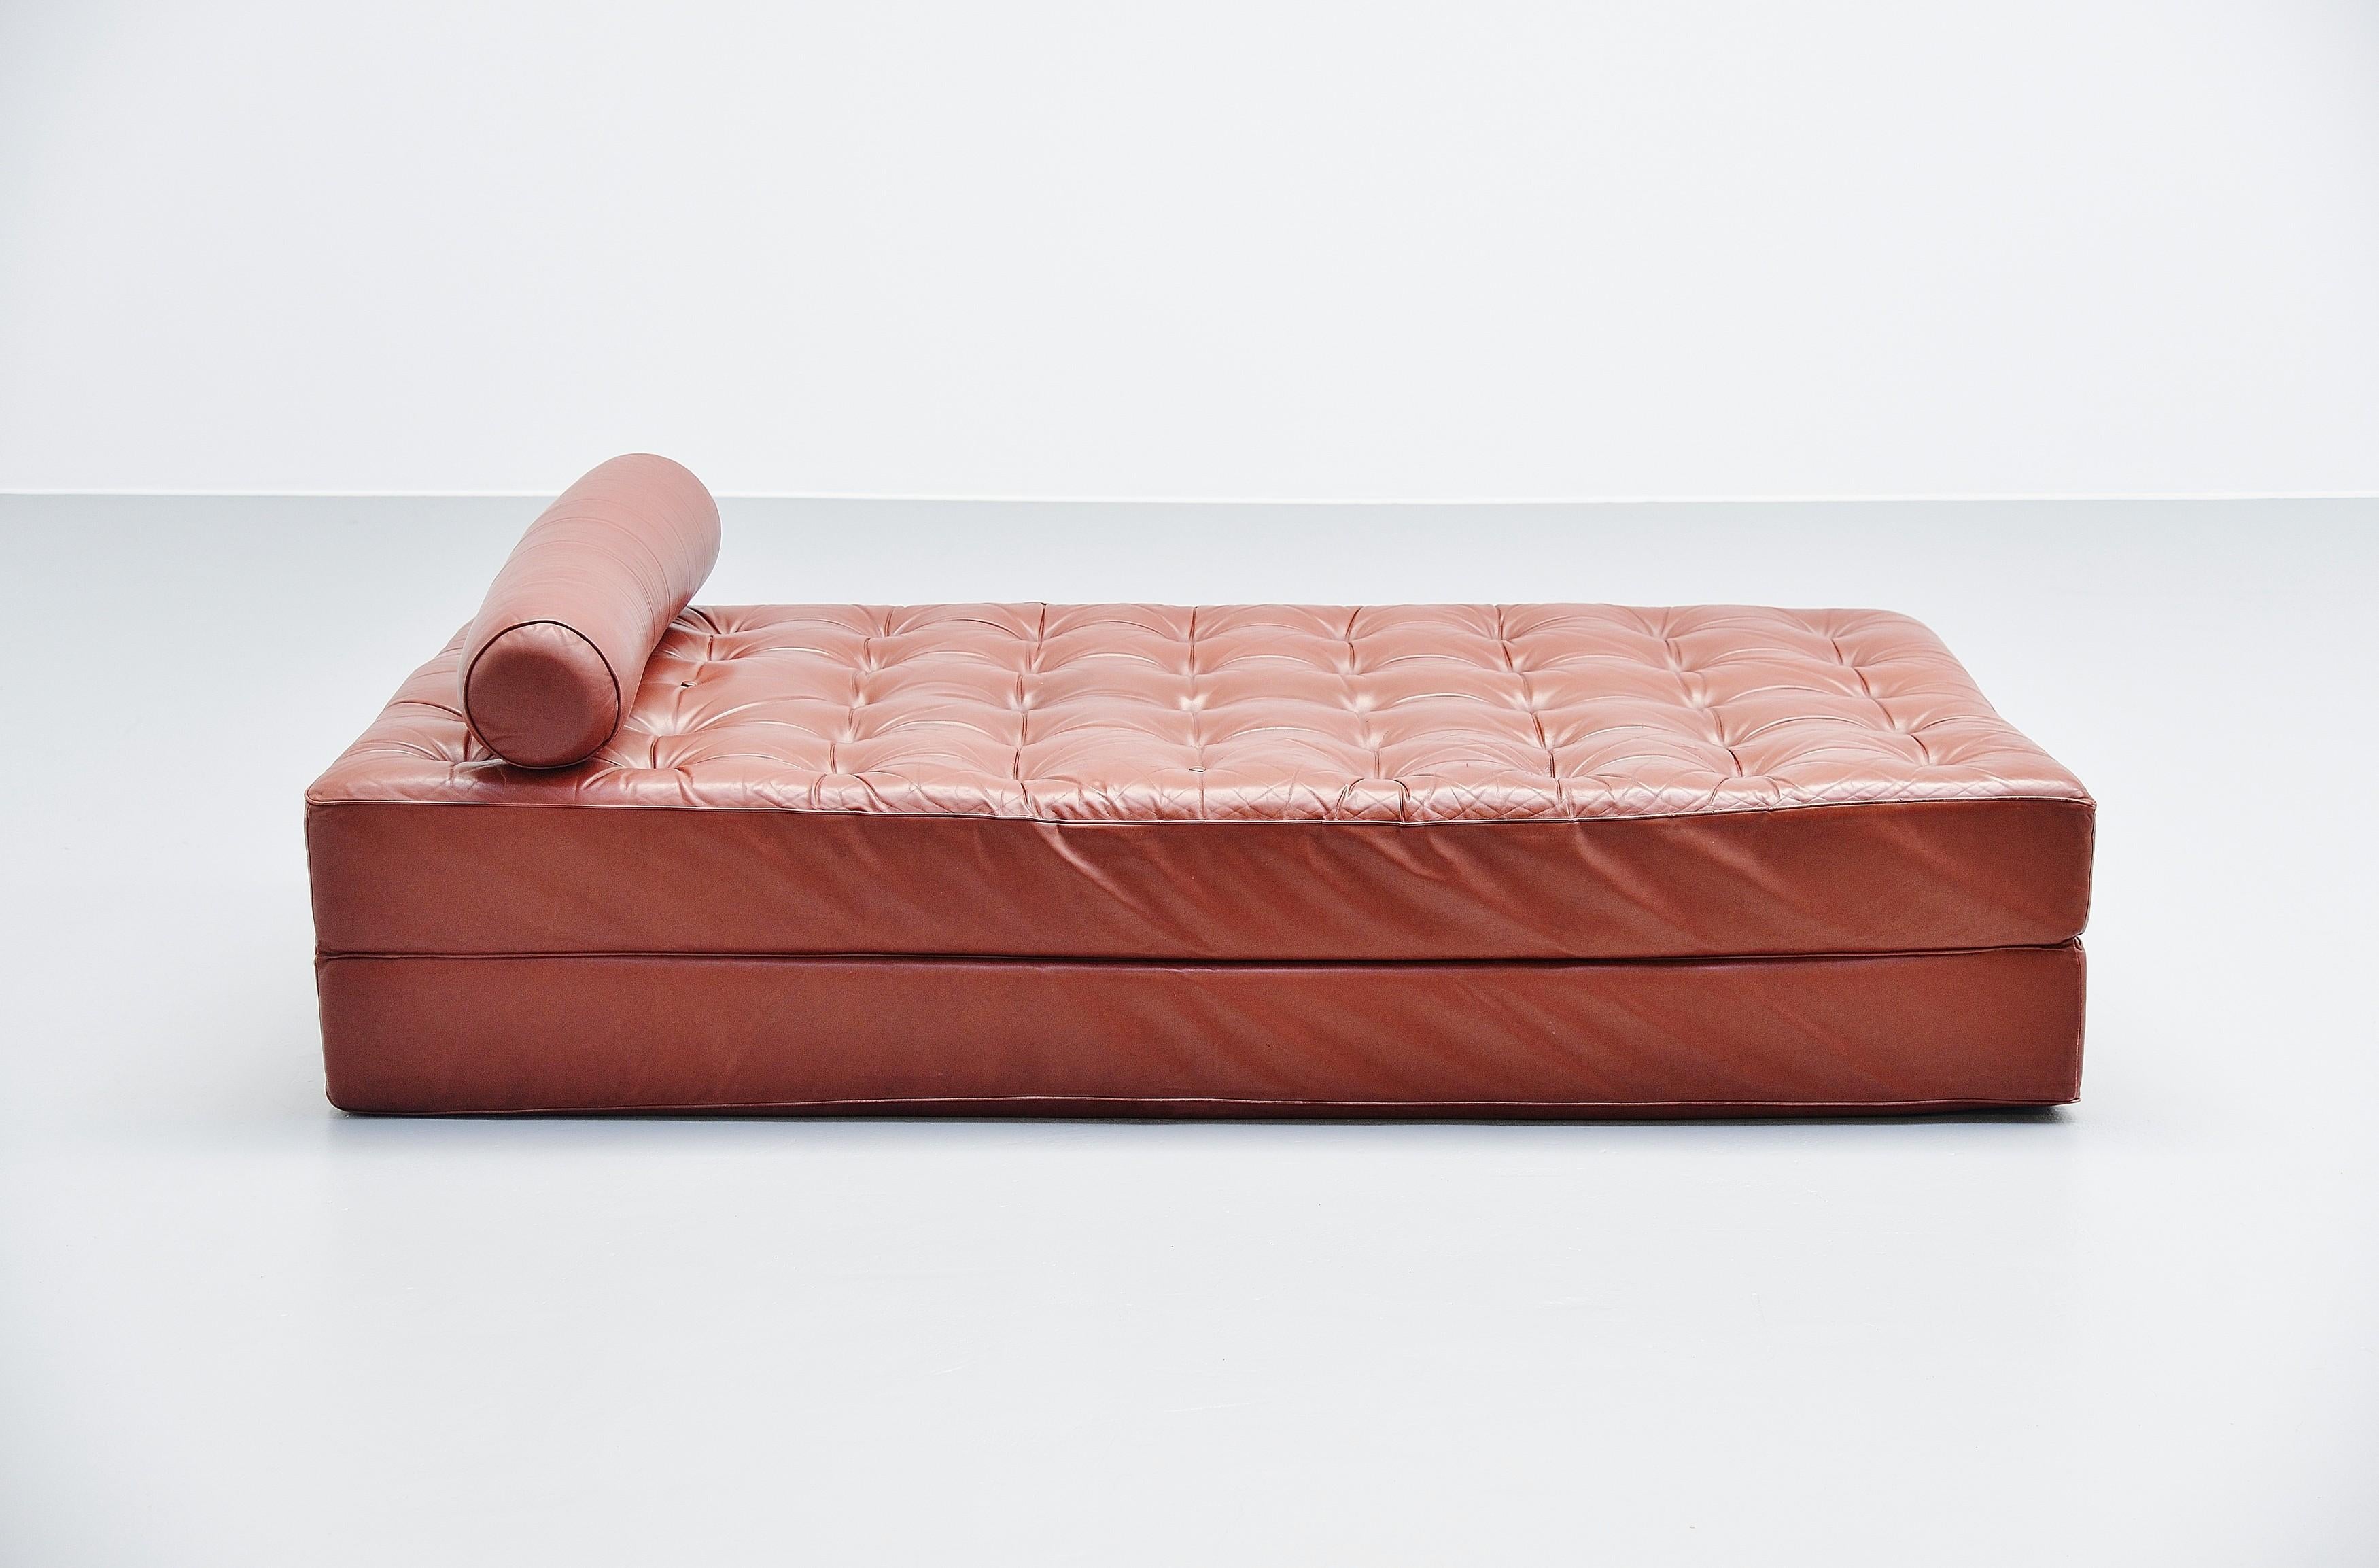 Very nice and rare leather tufted daybed model BR27 designed by Martin Visser and manufactured by ‘t Spectrum Bergeyk, Holland 1971. This lovely oxblood red leather daybed is a fantastic quite unique piece, produced from 1971-1973. It’s only the